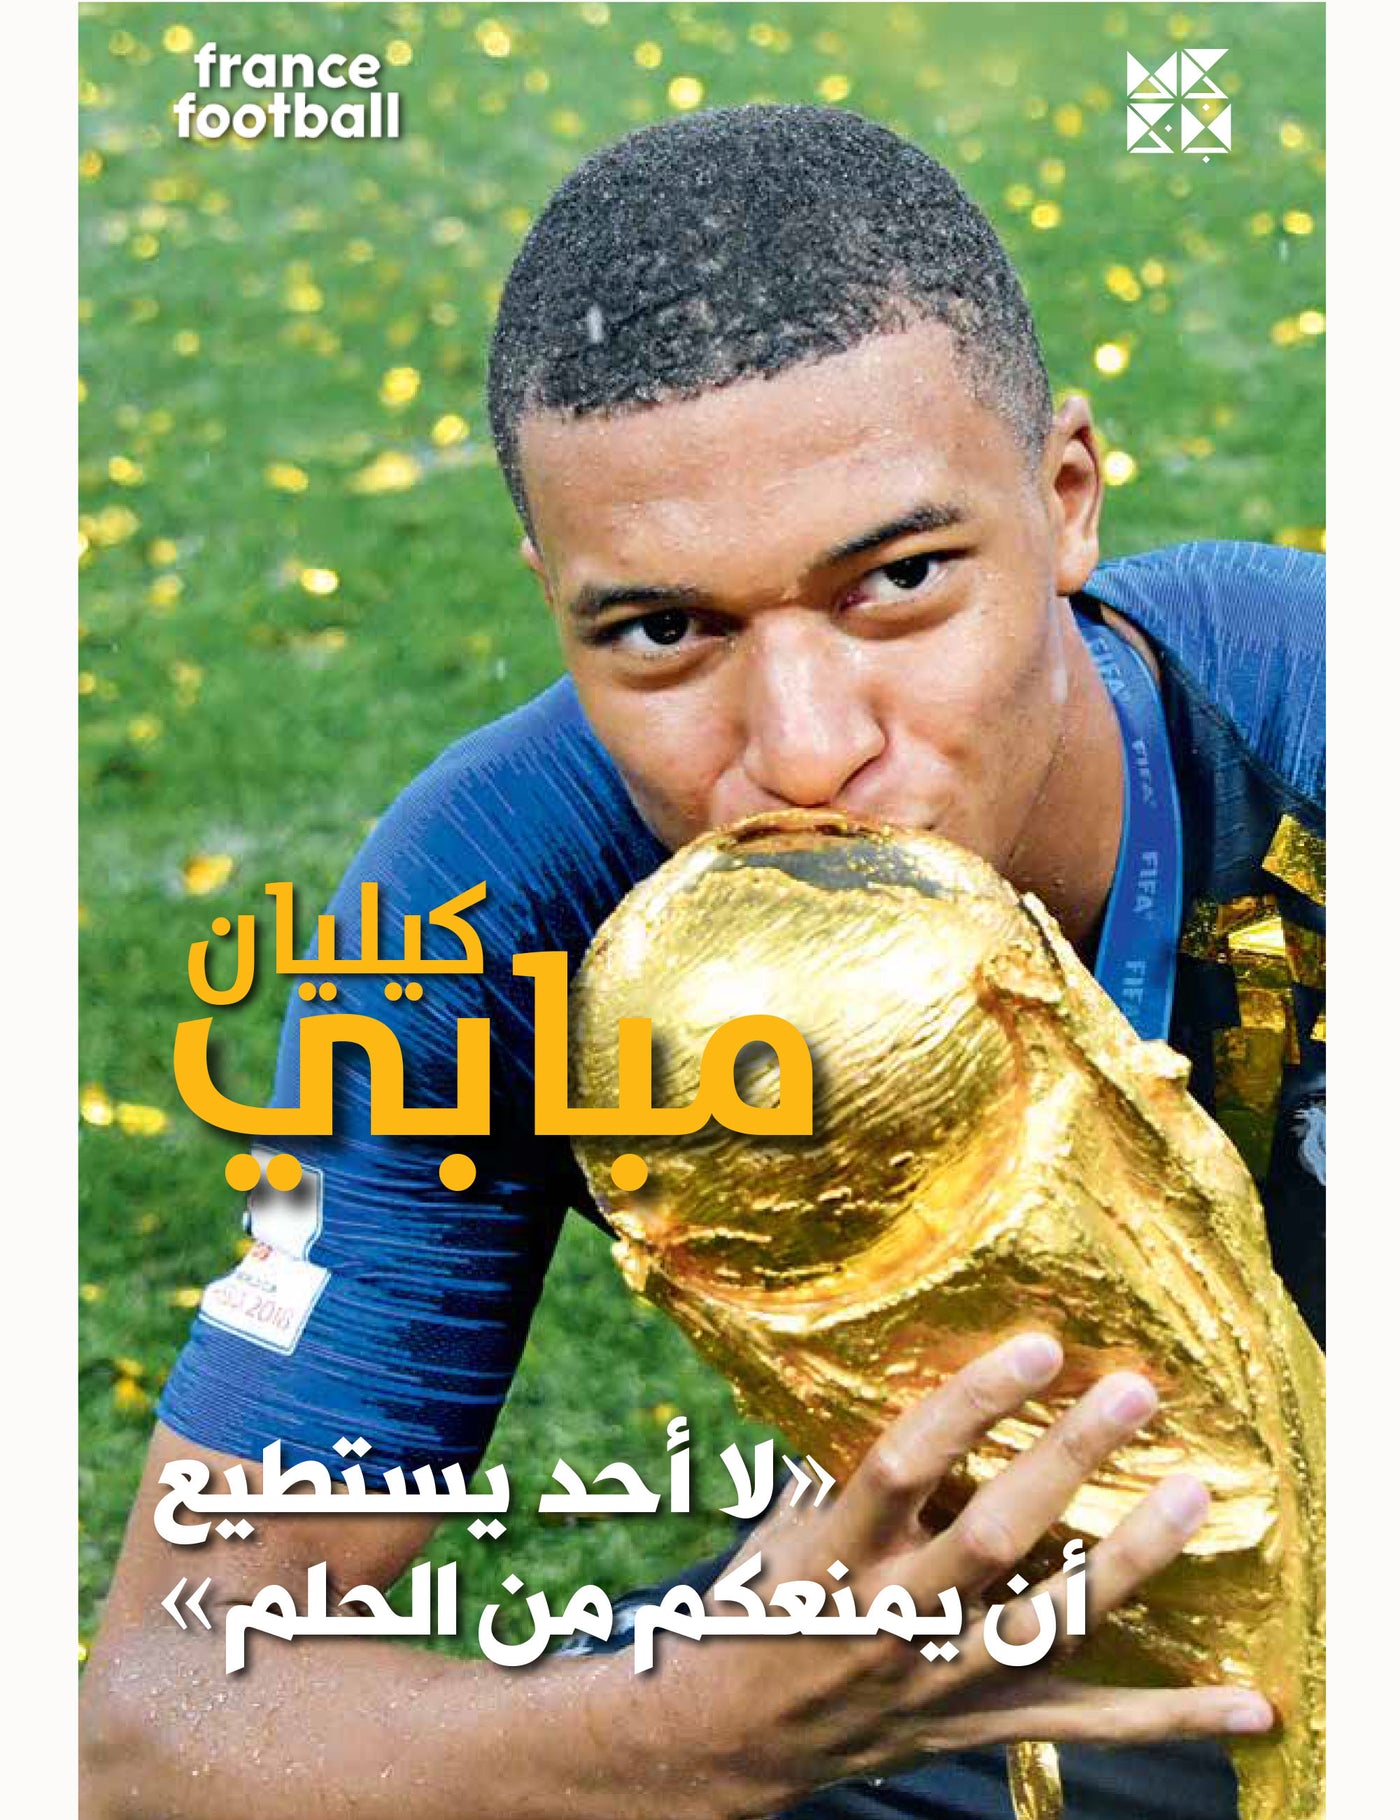 Kylian Mbappé Biography Book Cover